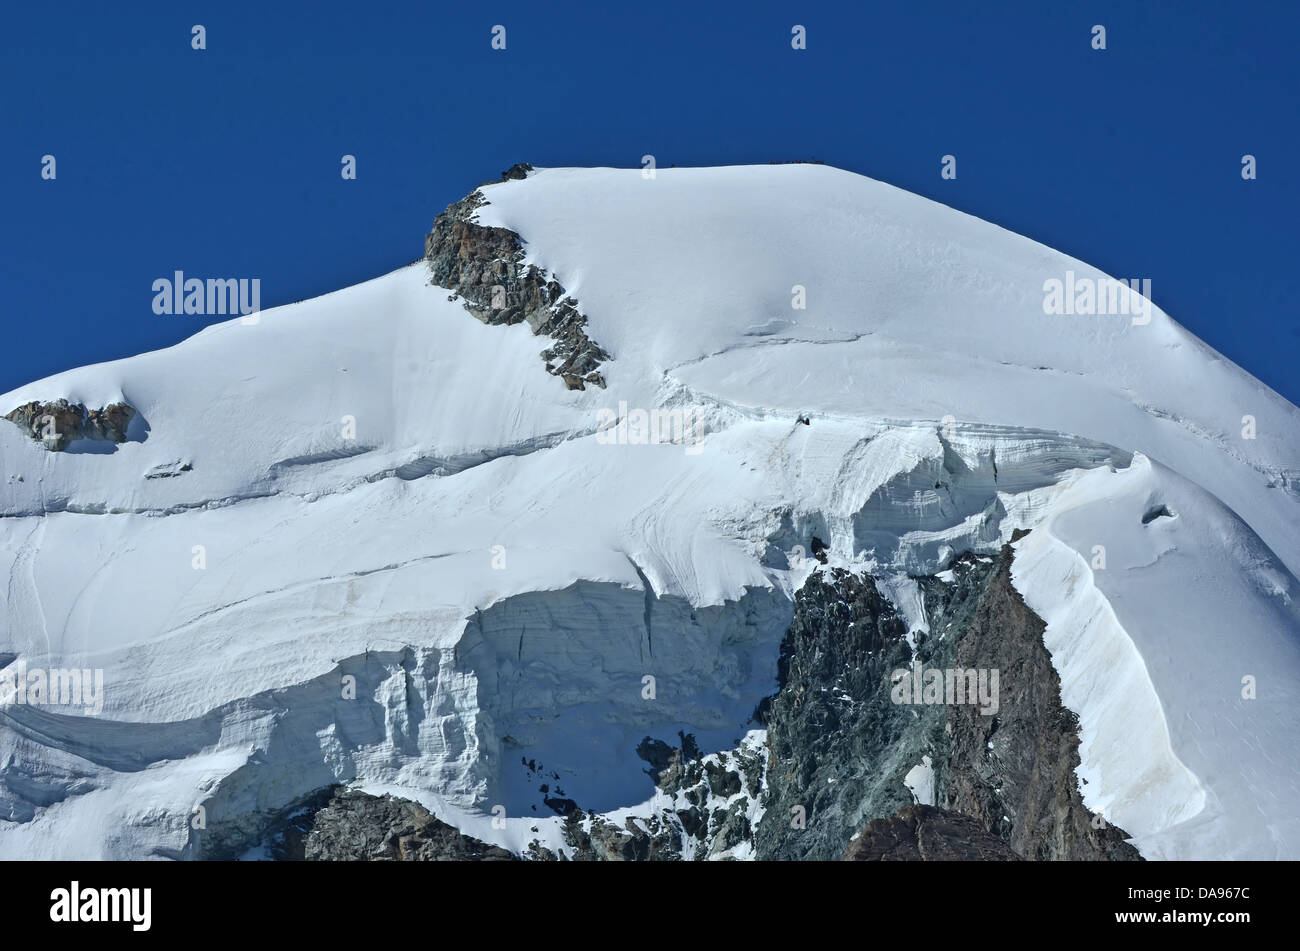 the summit and north face of the Allalinhorn in the southern swiss alps between Zermatt and Saas Fee. Showing a team of, on the Stock Photo